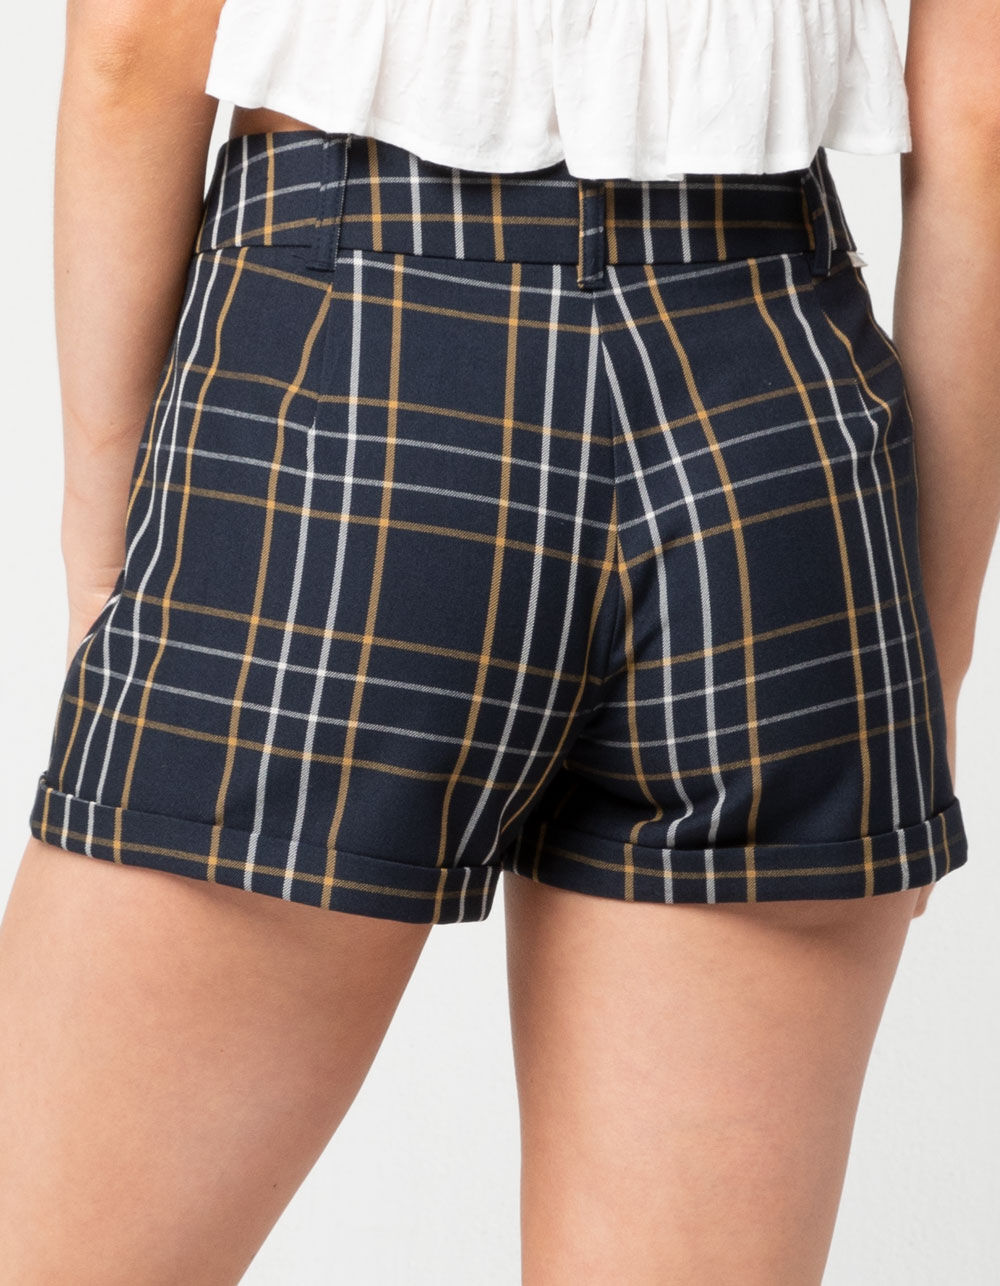 SKY AND SPARROW Plaid Womens Shorts - NAVY COMBO | Tillys